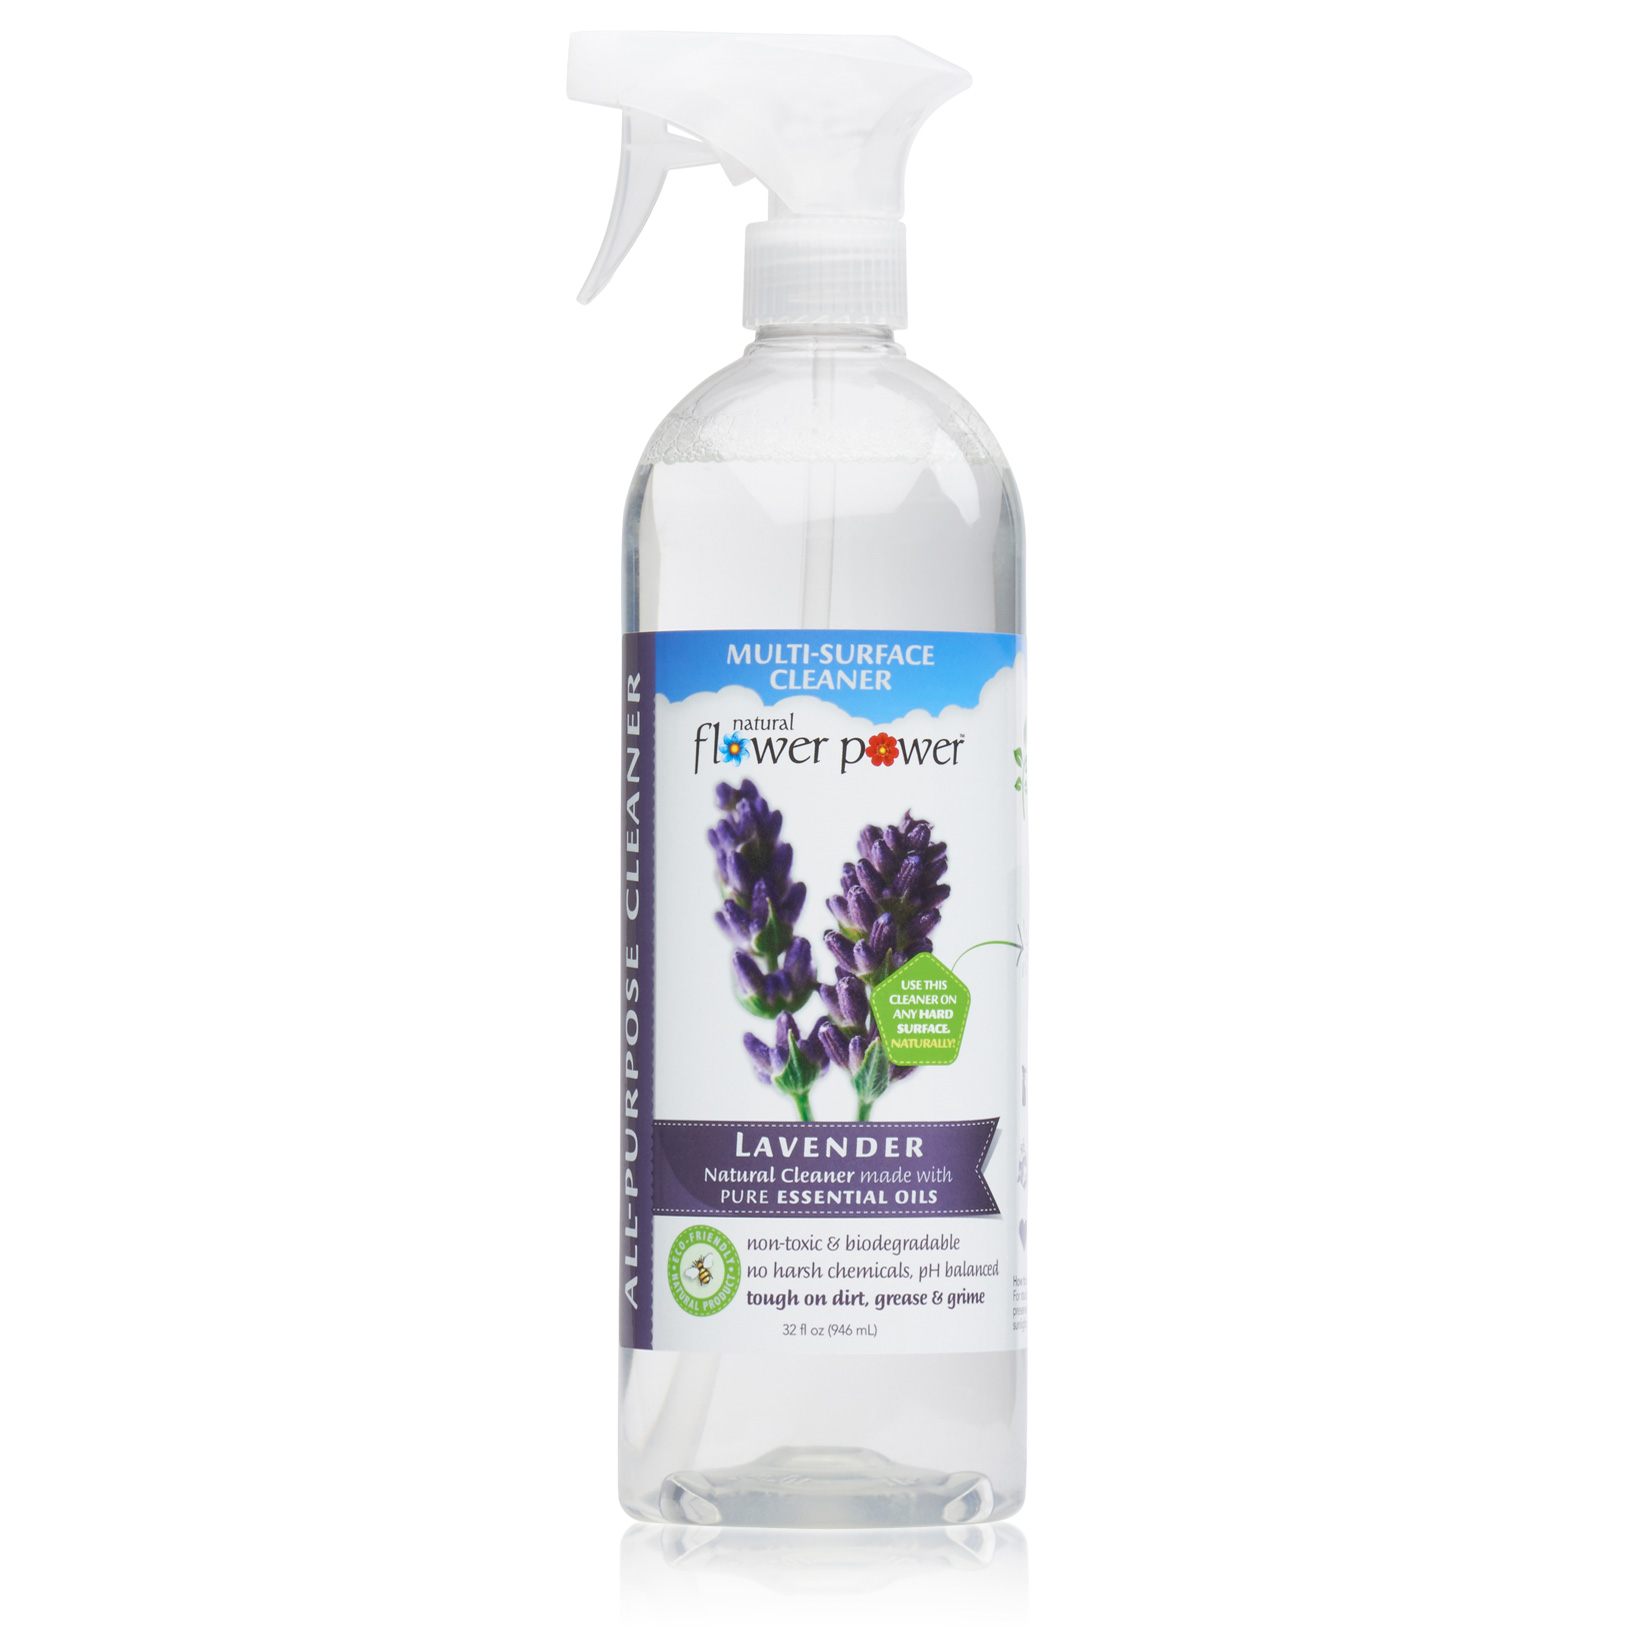 http://naturalflowerpower.com/wp-content/uploads/2013/02/all-purpose-cleaner-lavender-front-1650x1650-1.jpg